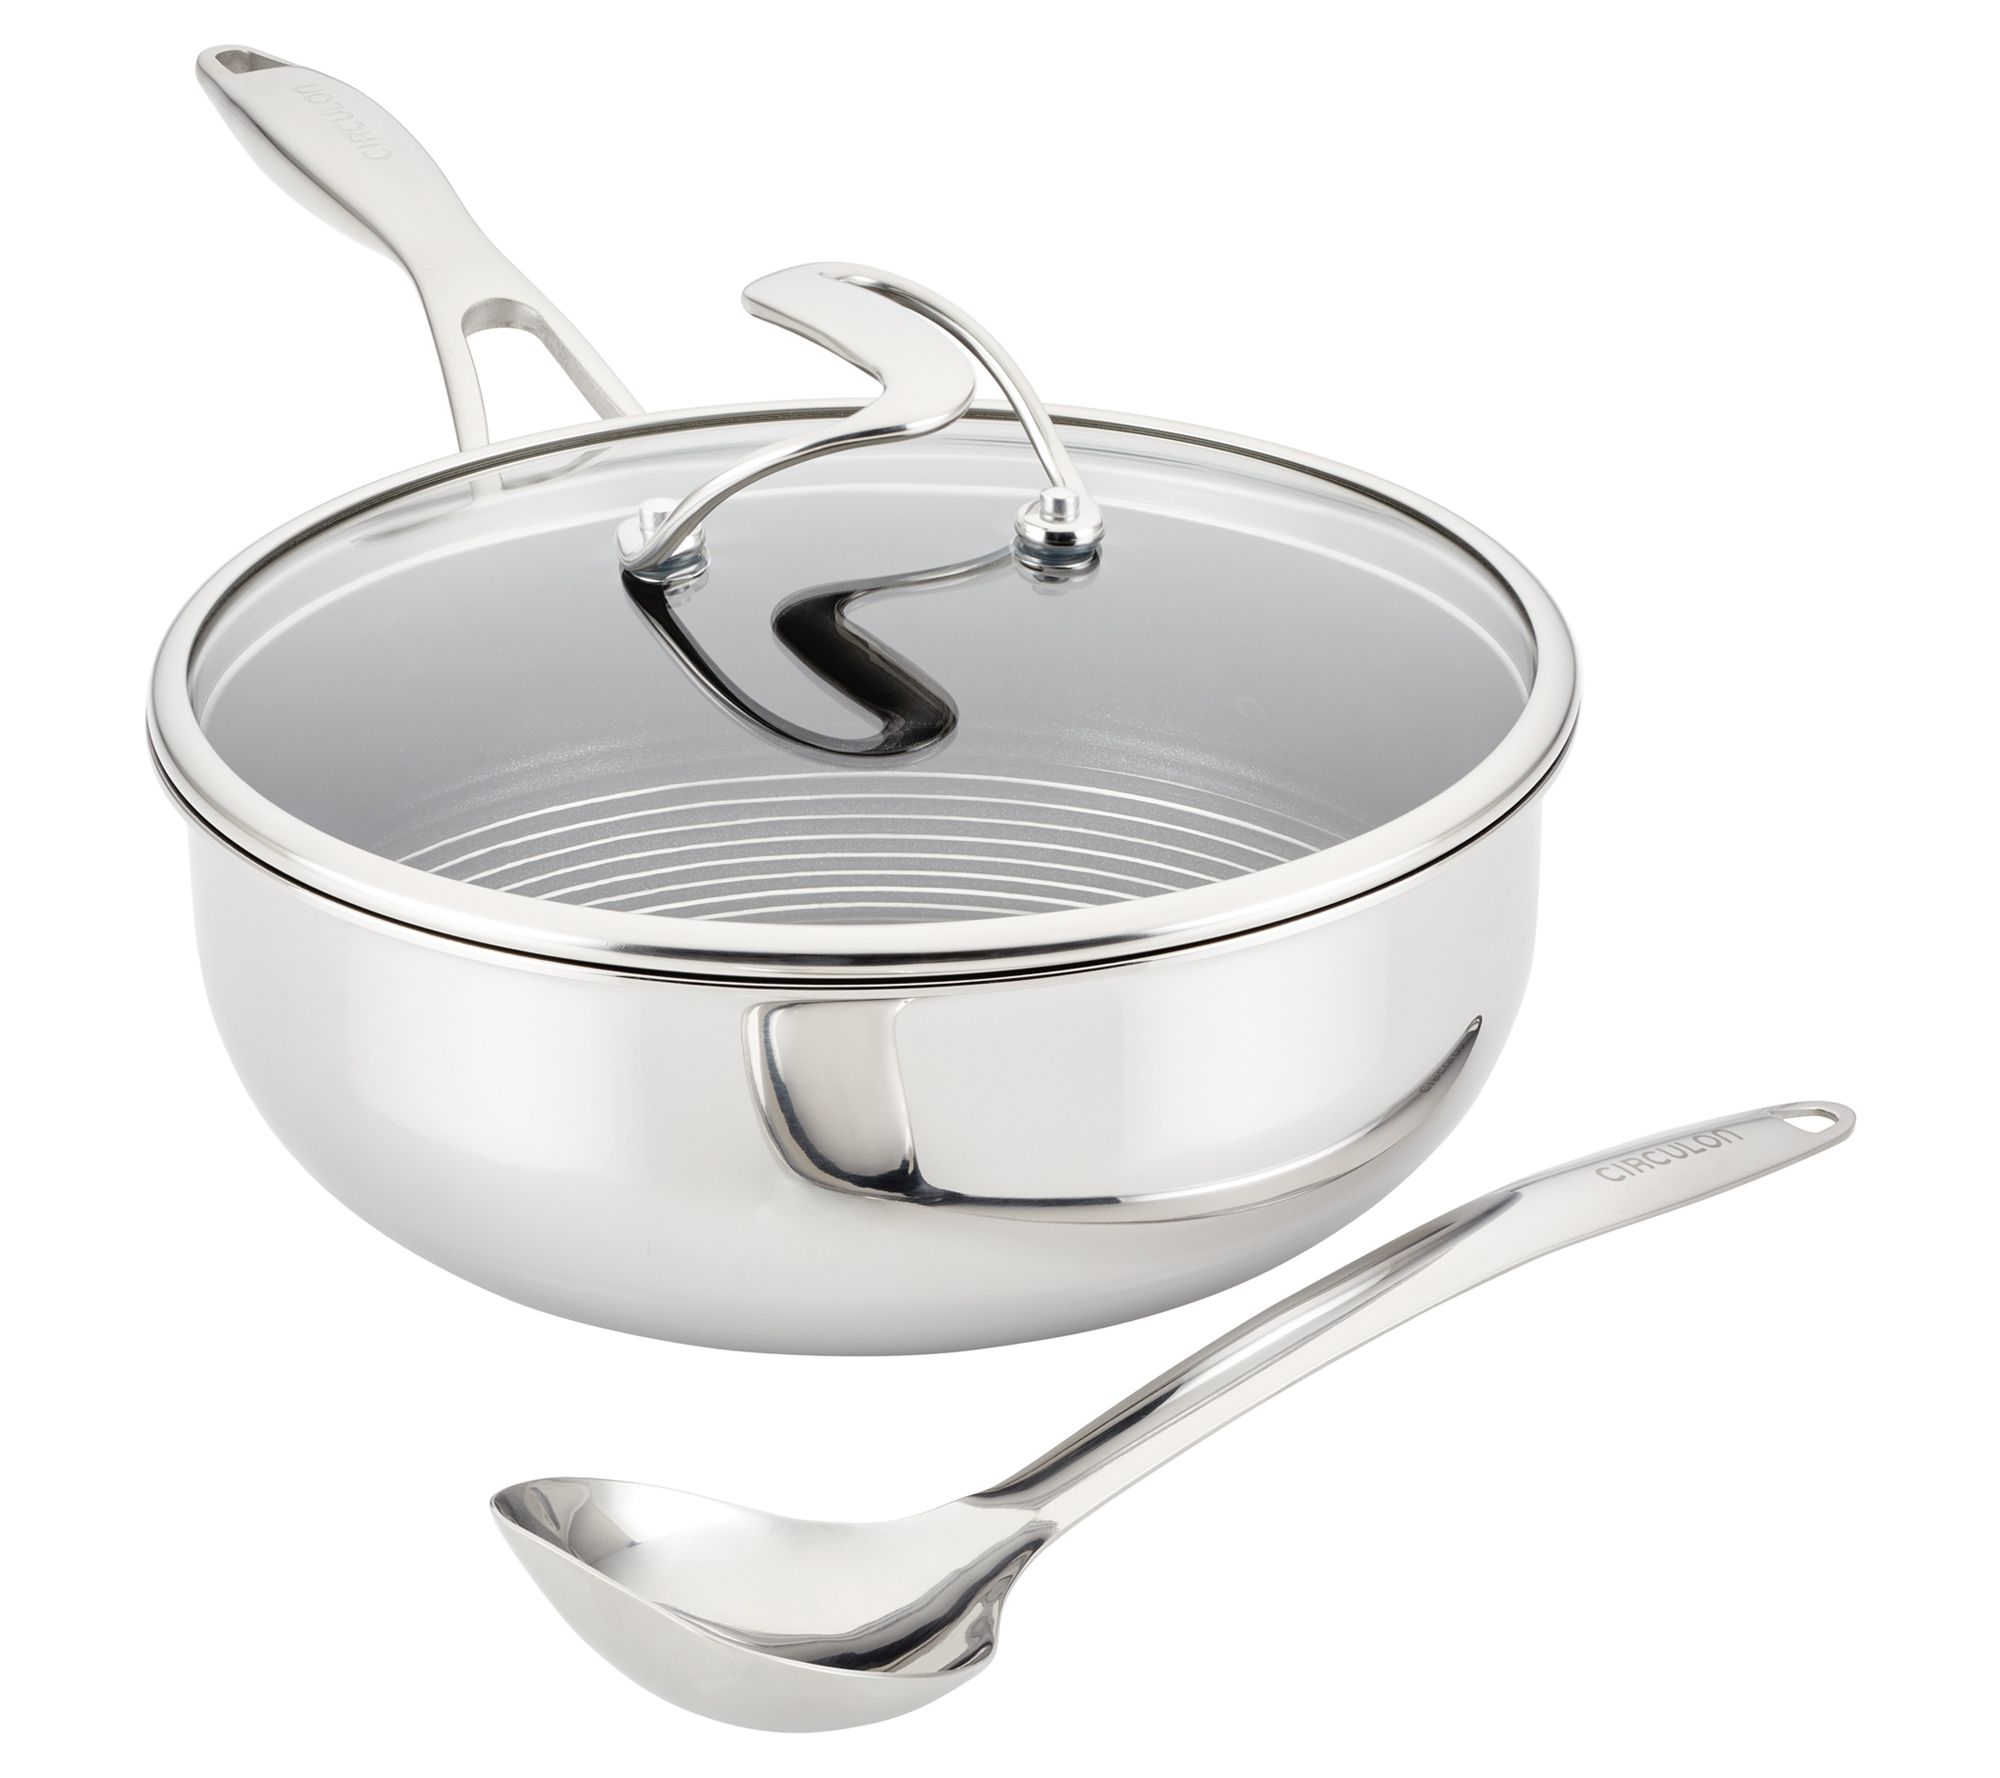 Oster Sangerfield 3-Piece 11-in. Stainless Steel Everyday Pan with